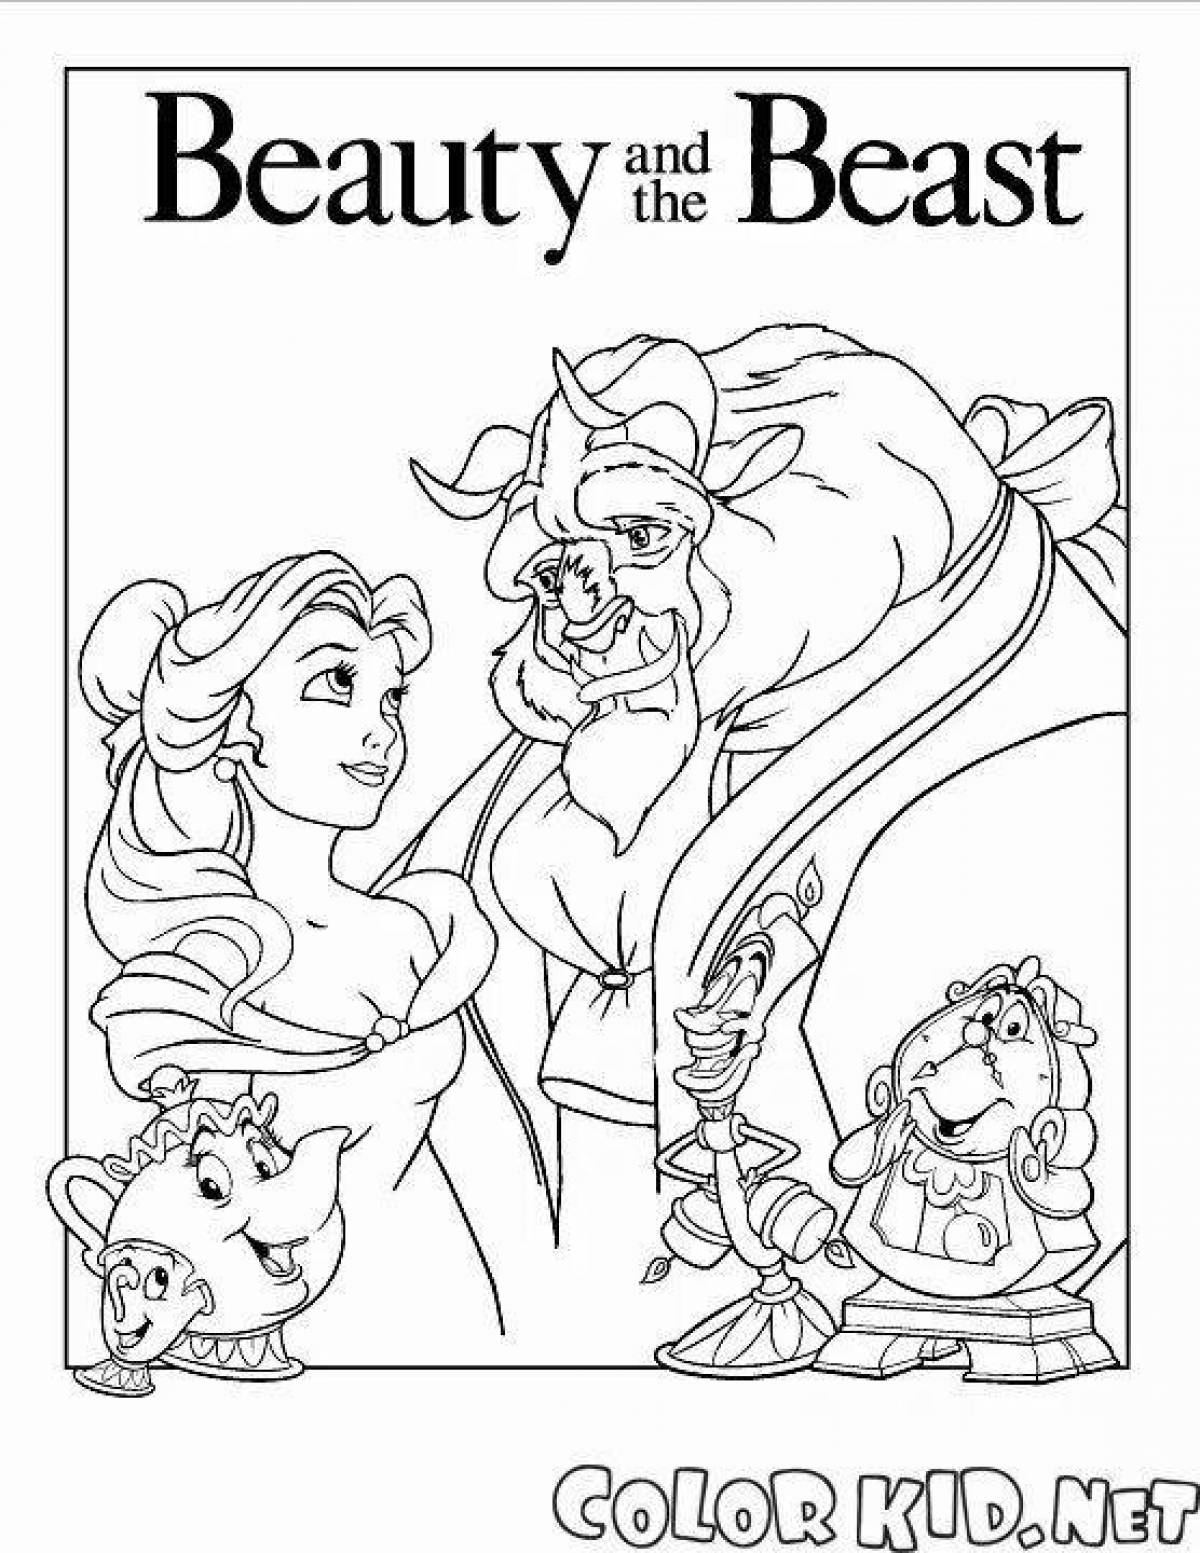 Gorgeous beauty and the beast coloring pages for kids